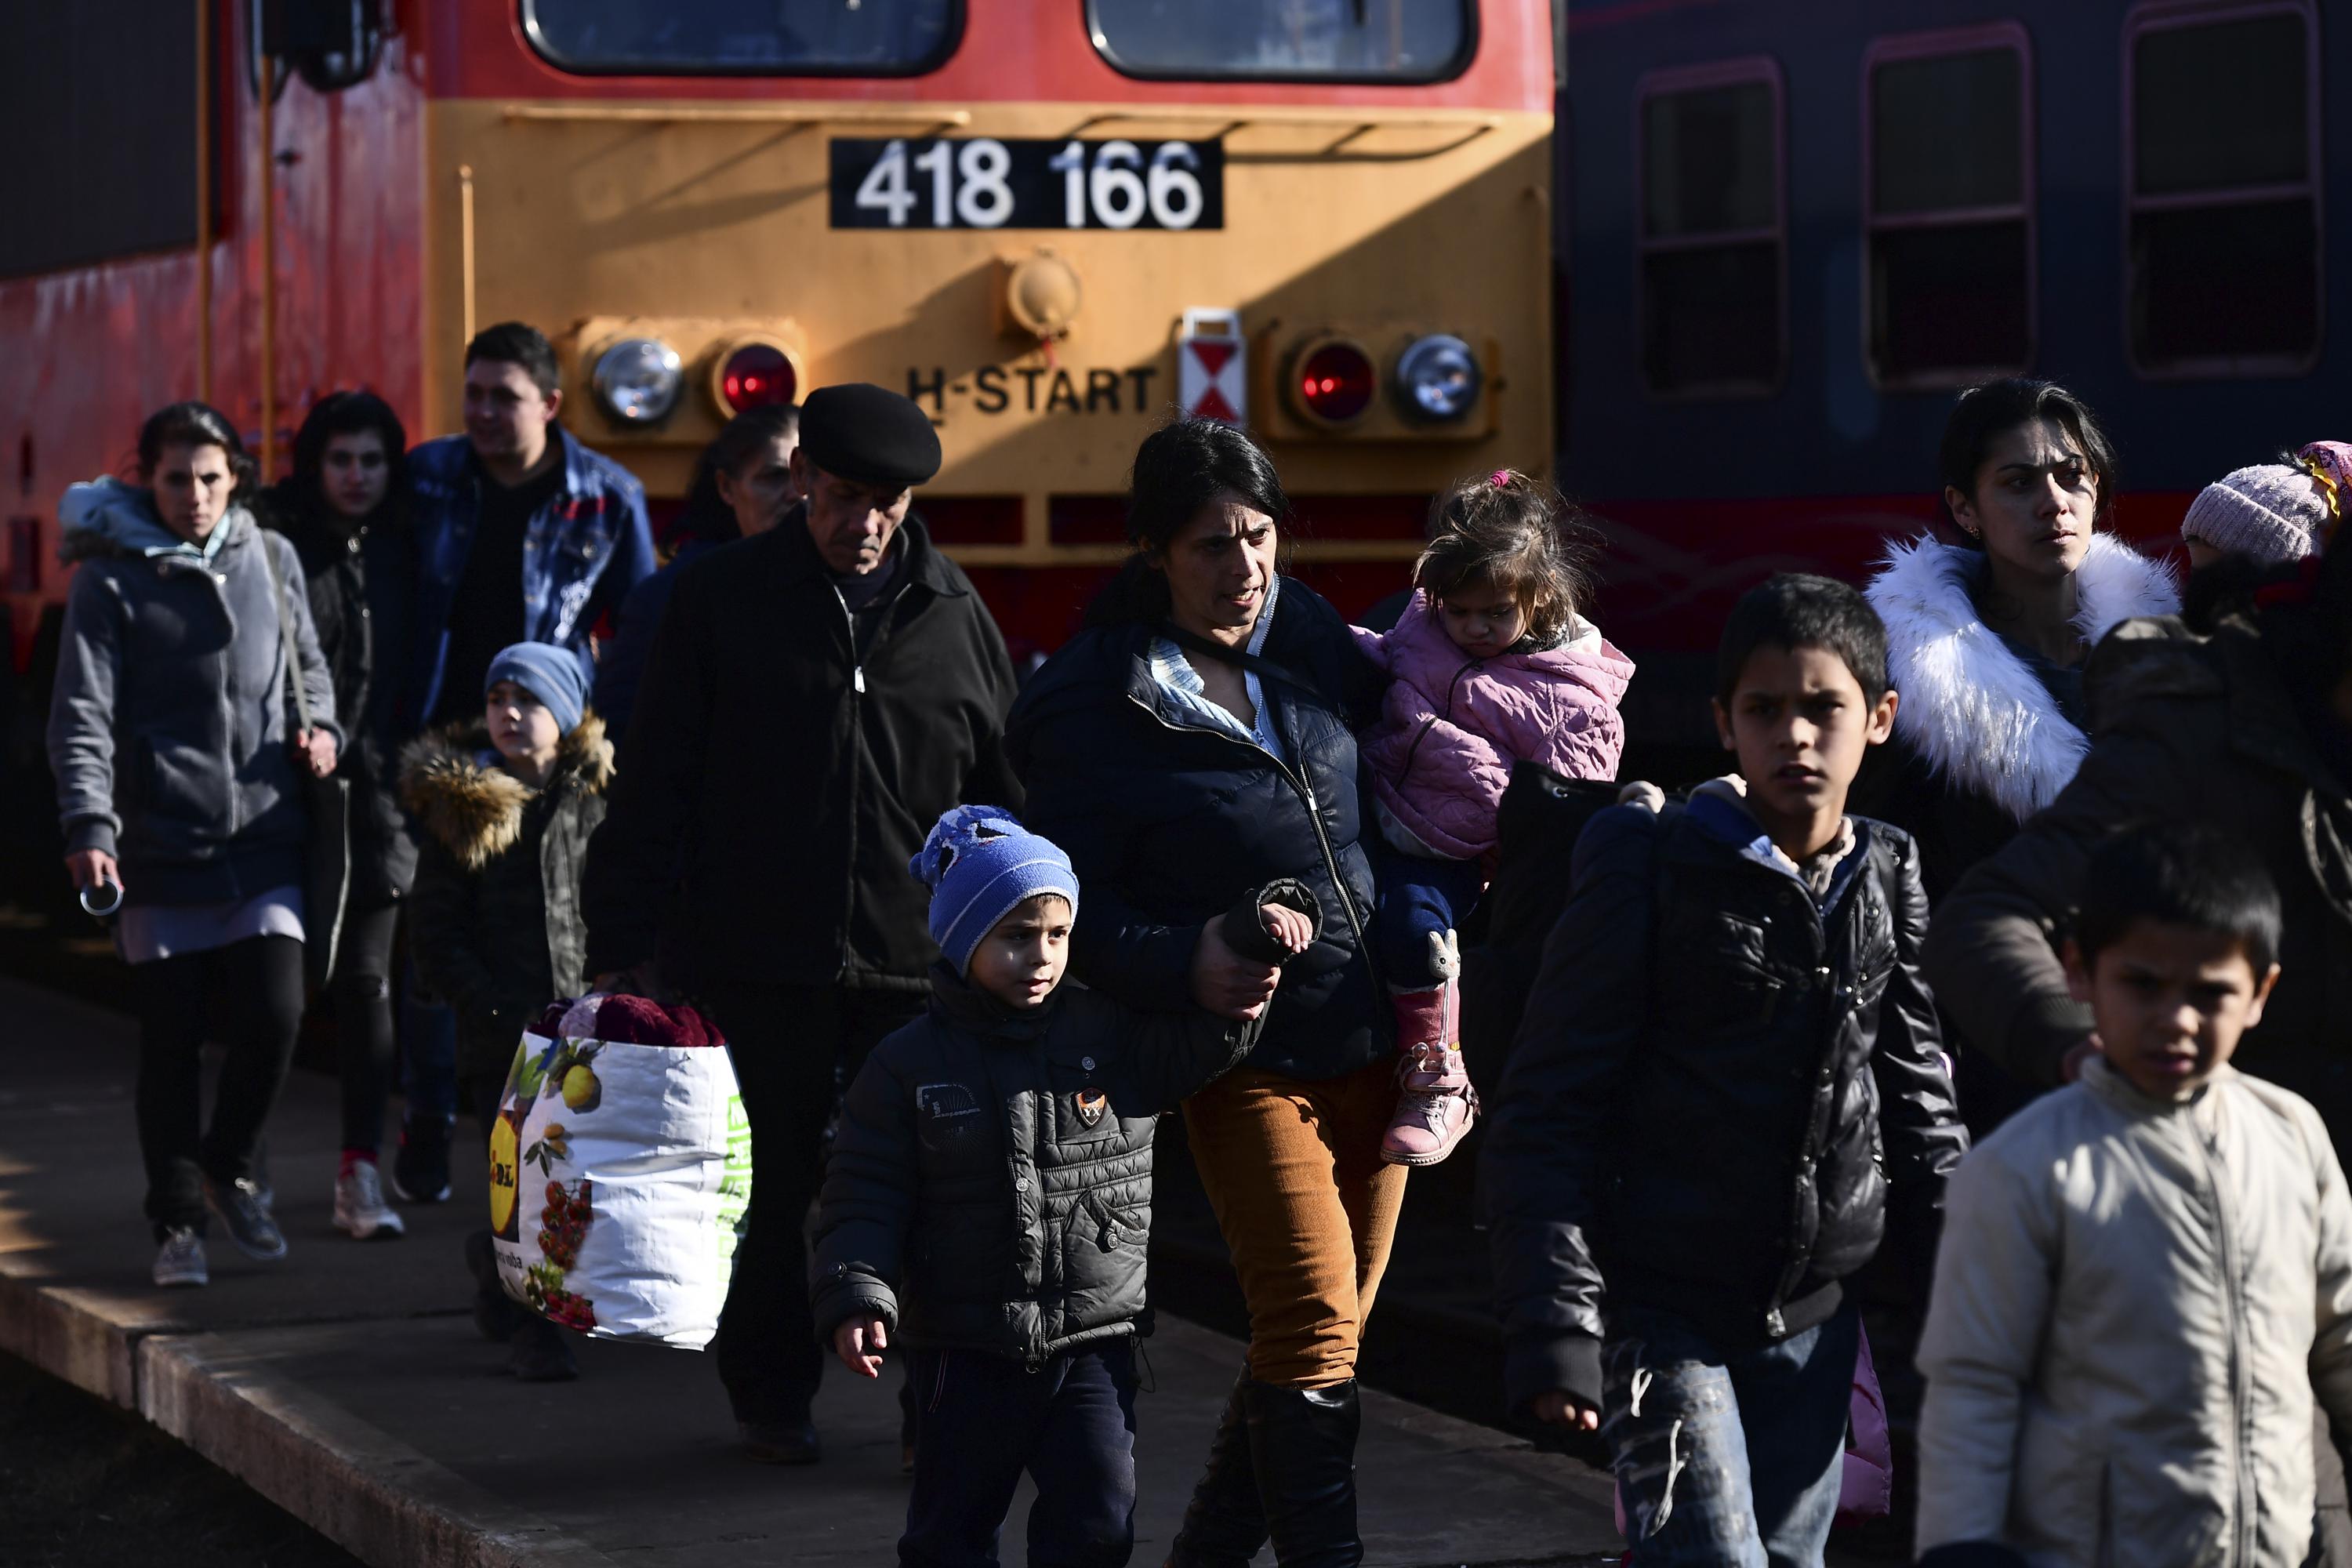 25,000 Ukrainians Have Entered Checkpoints On The Bulgarian-Romanian Border